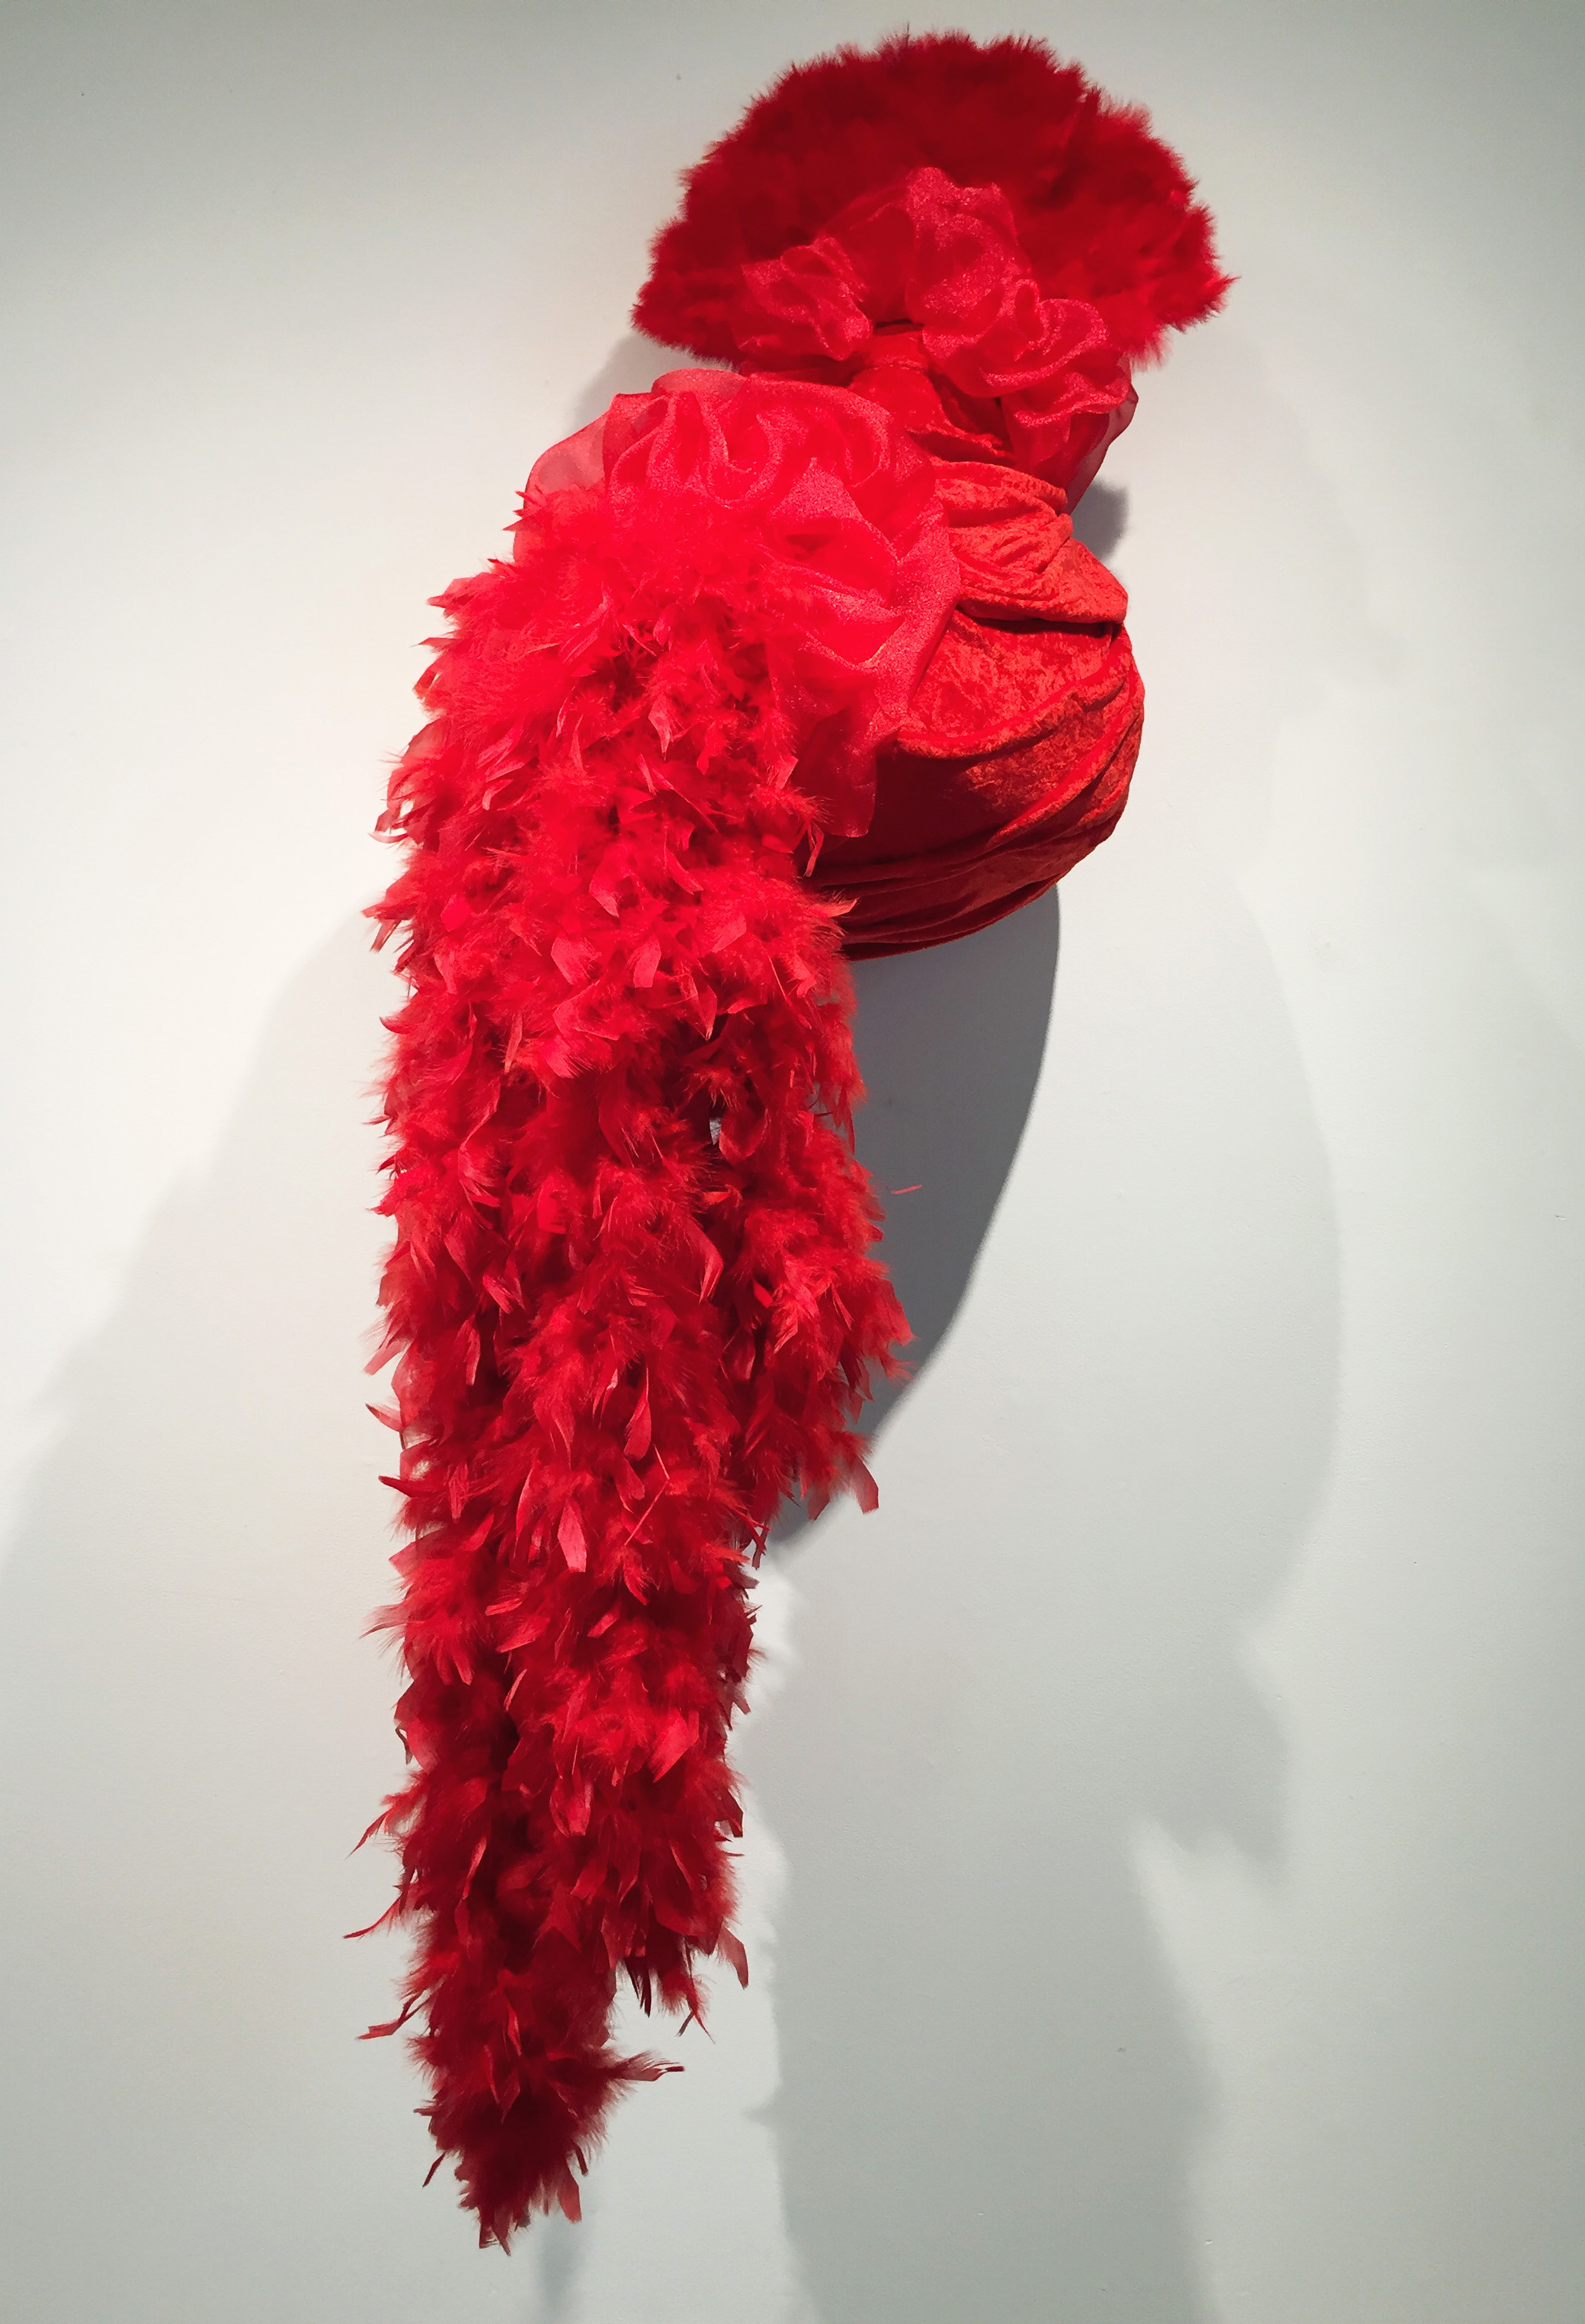    Vivana  , 2019  Polystyrene foam, fabric, feathers, sequins, and dressmaker pins  60 x 21 x 20 inches     